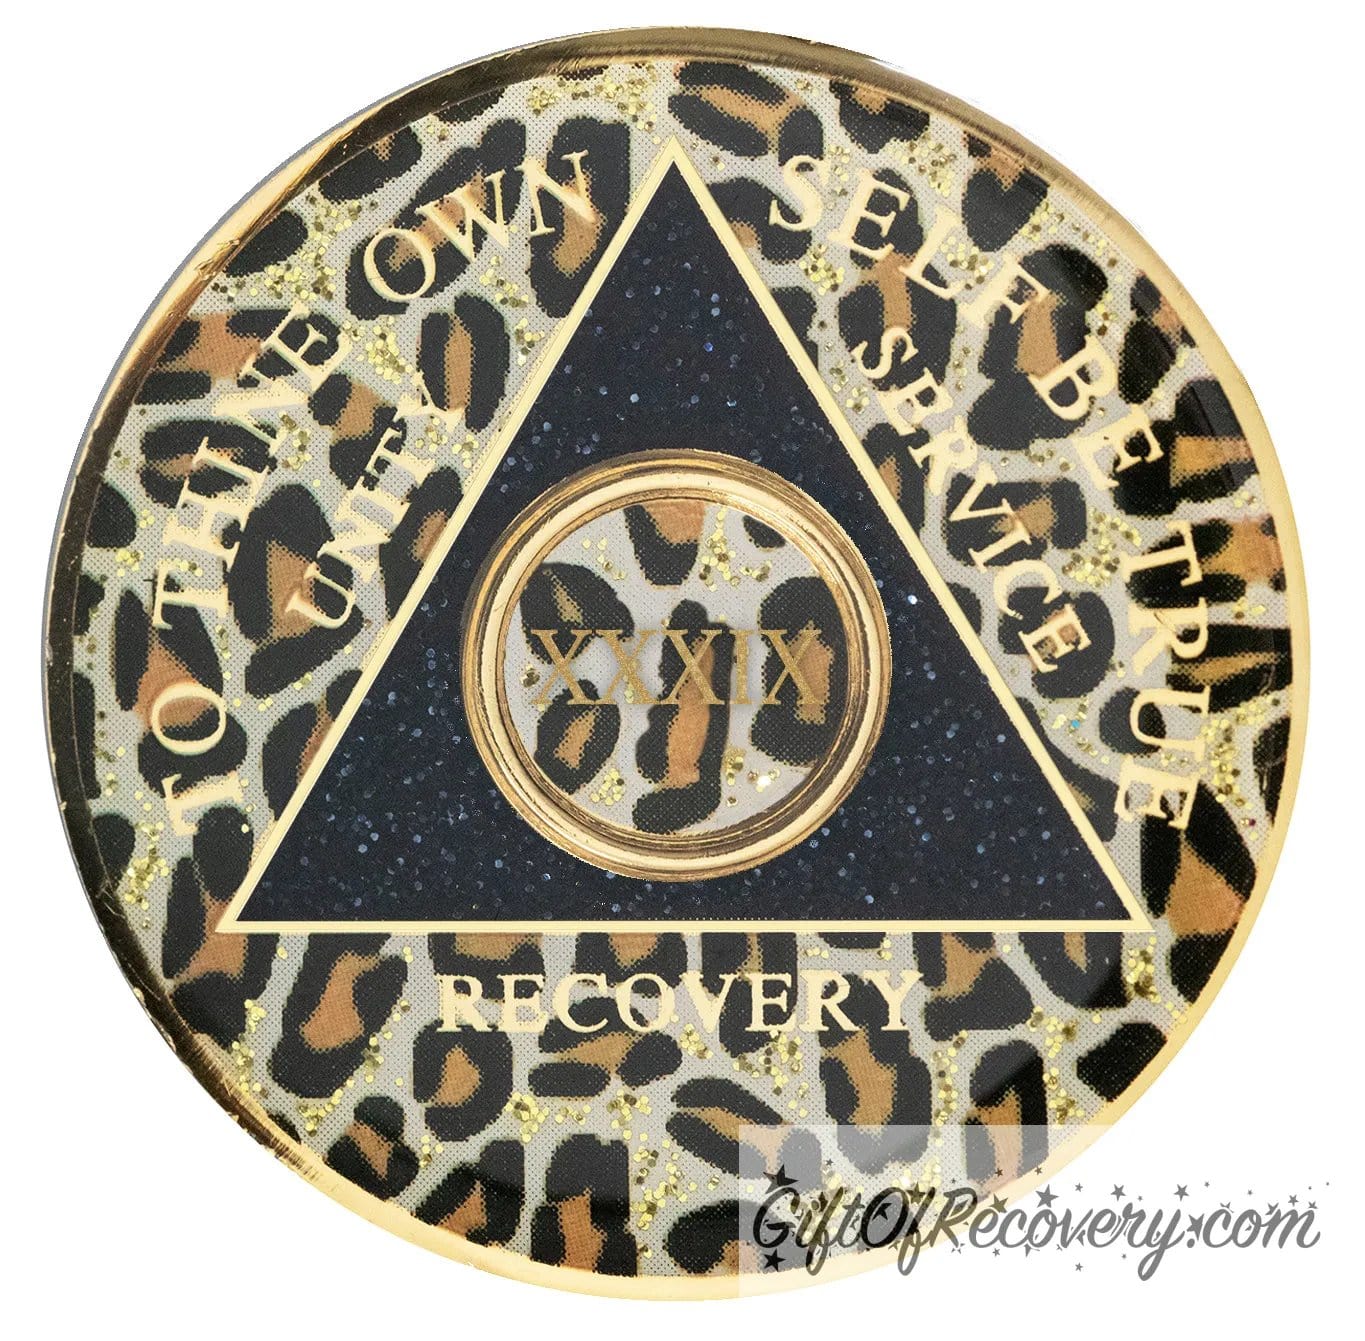 39 year AA medallion leopard print with gold flaked spots, to thine own self be true, unity, service, recovery, and roman numeral are gold foil so you can let your recovery shine, not your time, the circle triangle is embossed with 14k gold-plated brass, the recovery medallion is sealed with resin for a shiny finish.